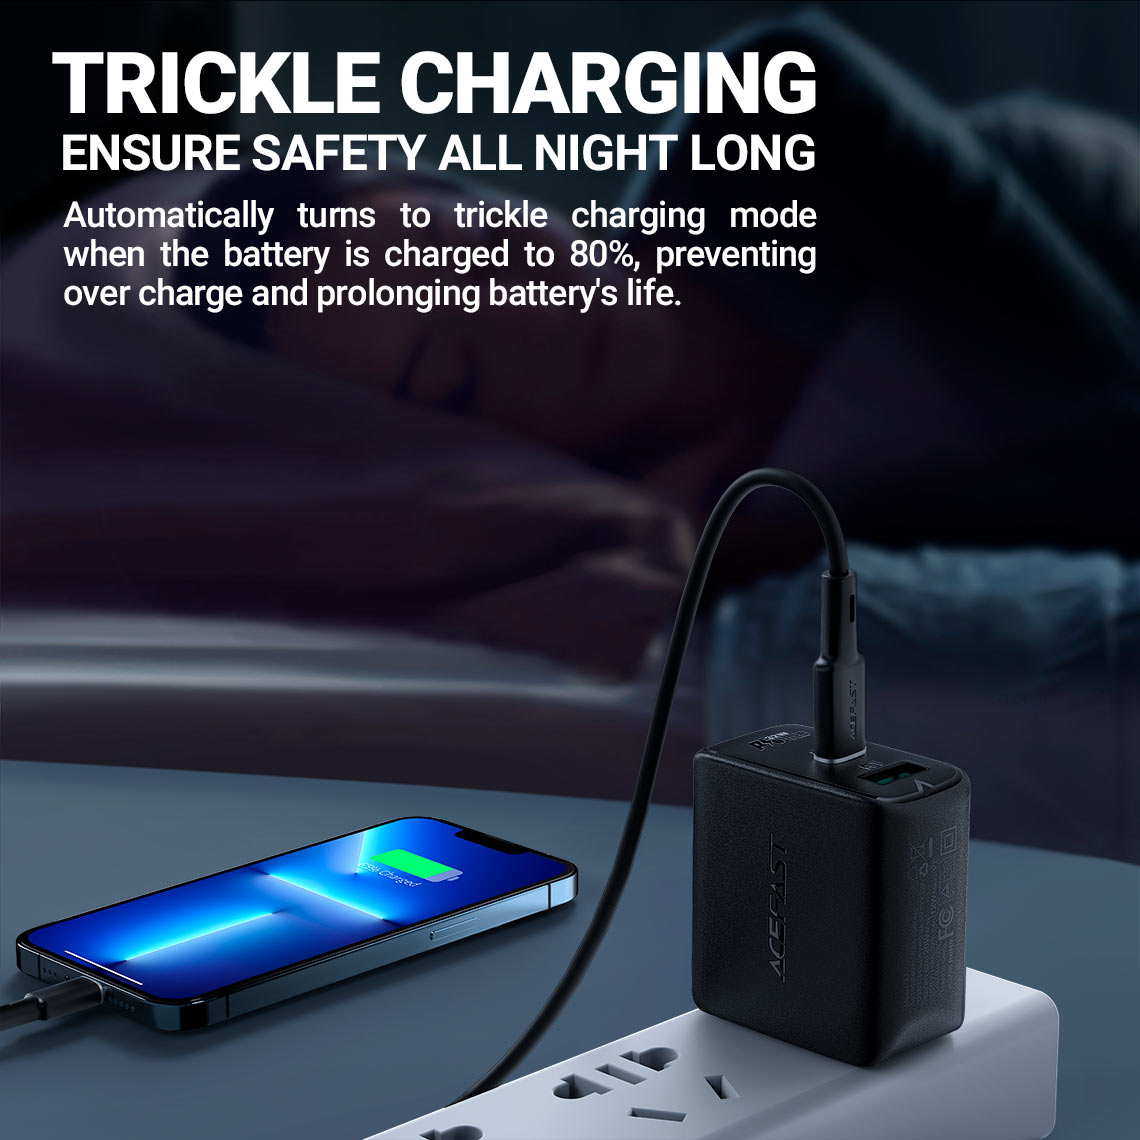 ACEFAST A7 PD 32W (USB-C+USB-A) DUAL PORT CHARGER - WHITE